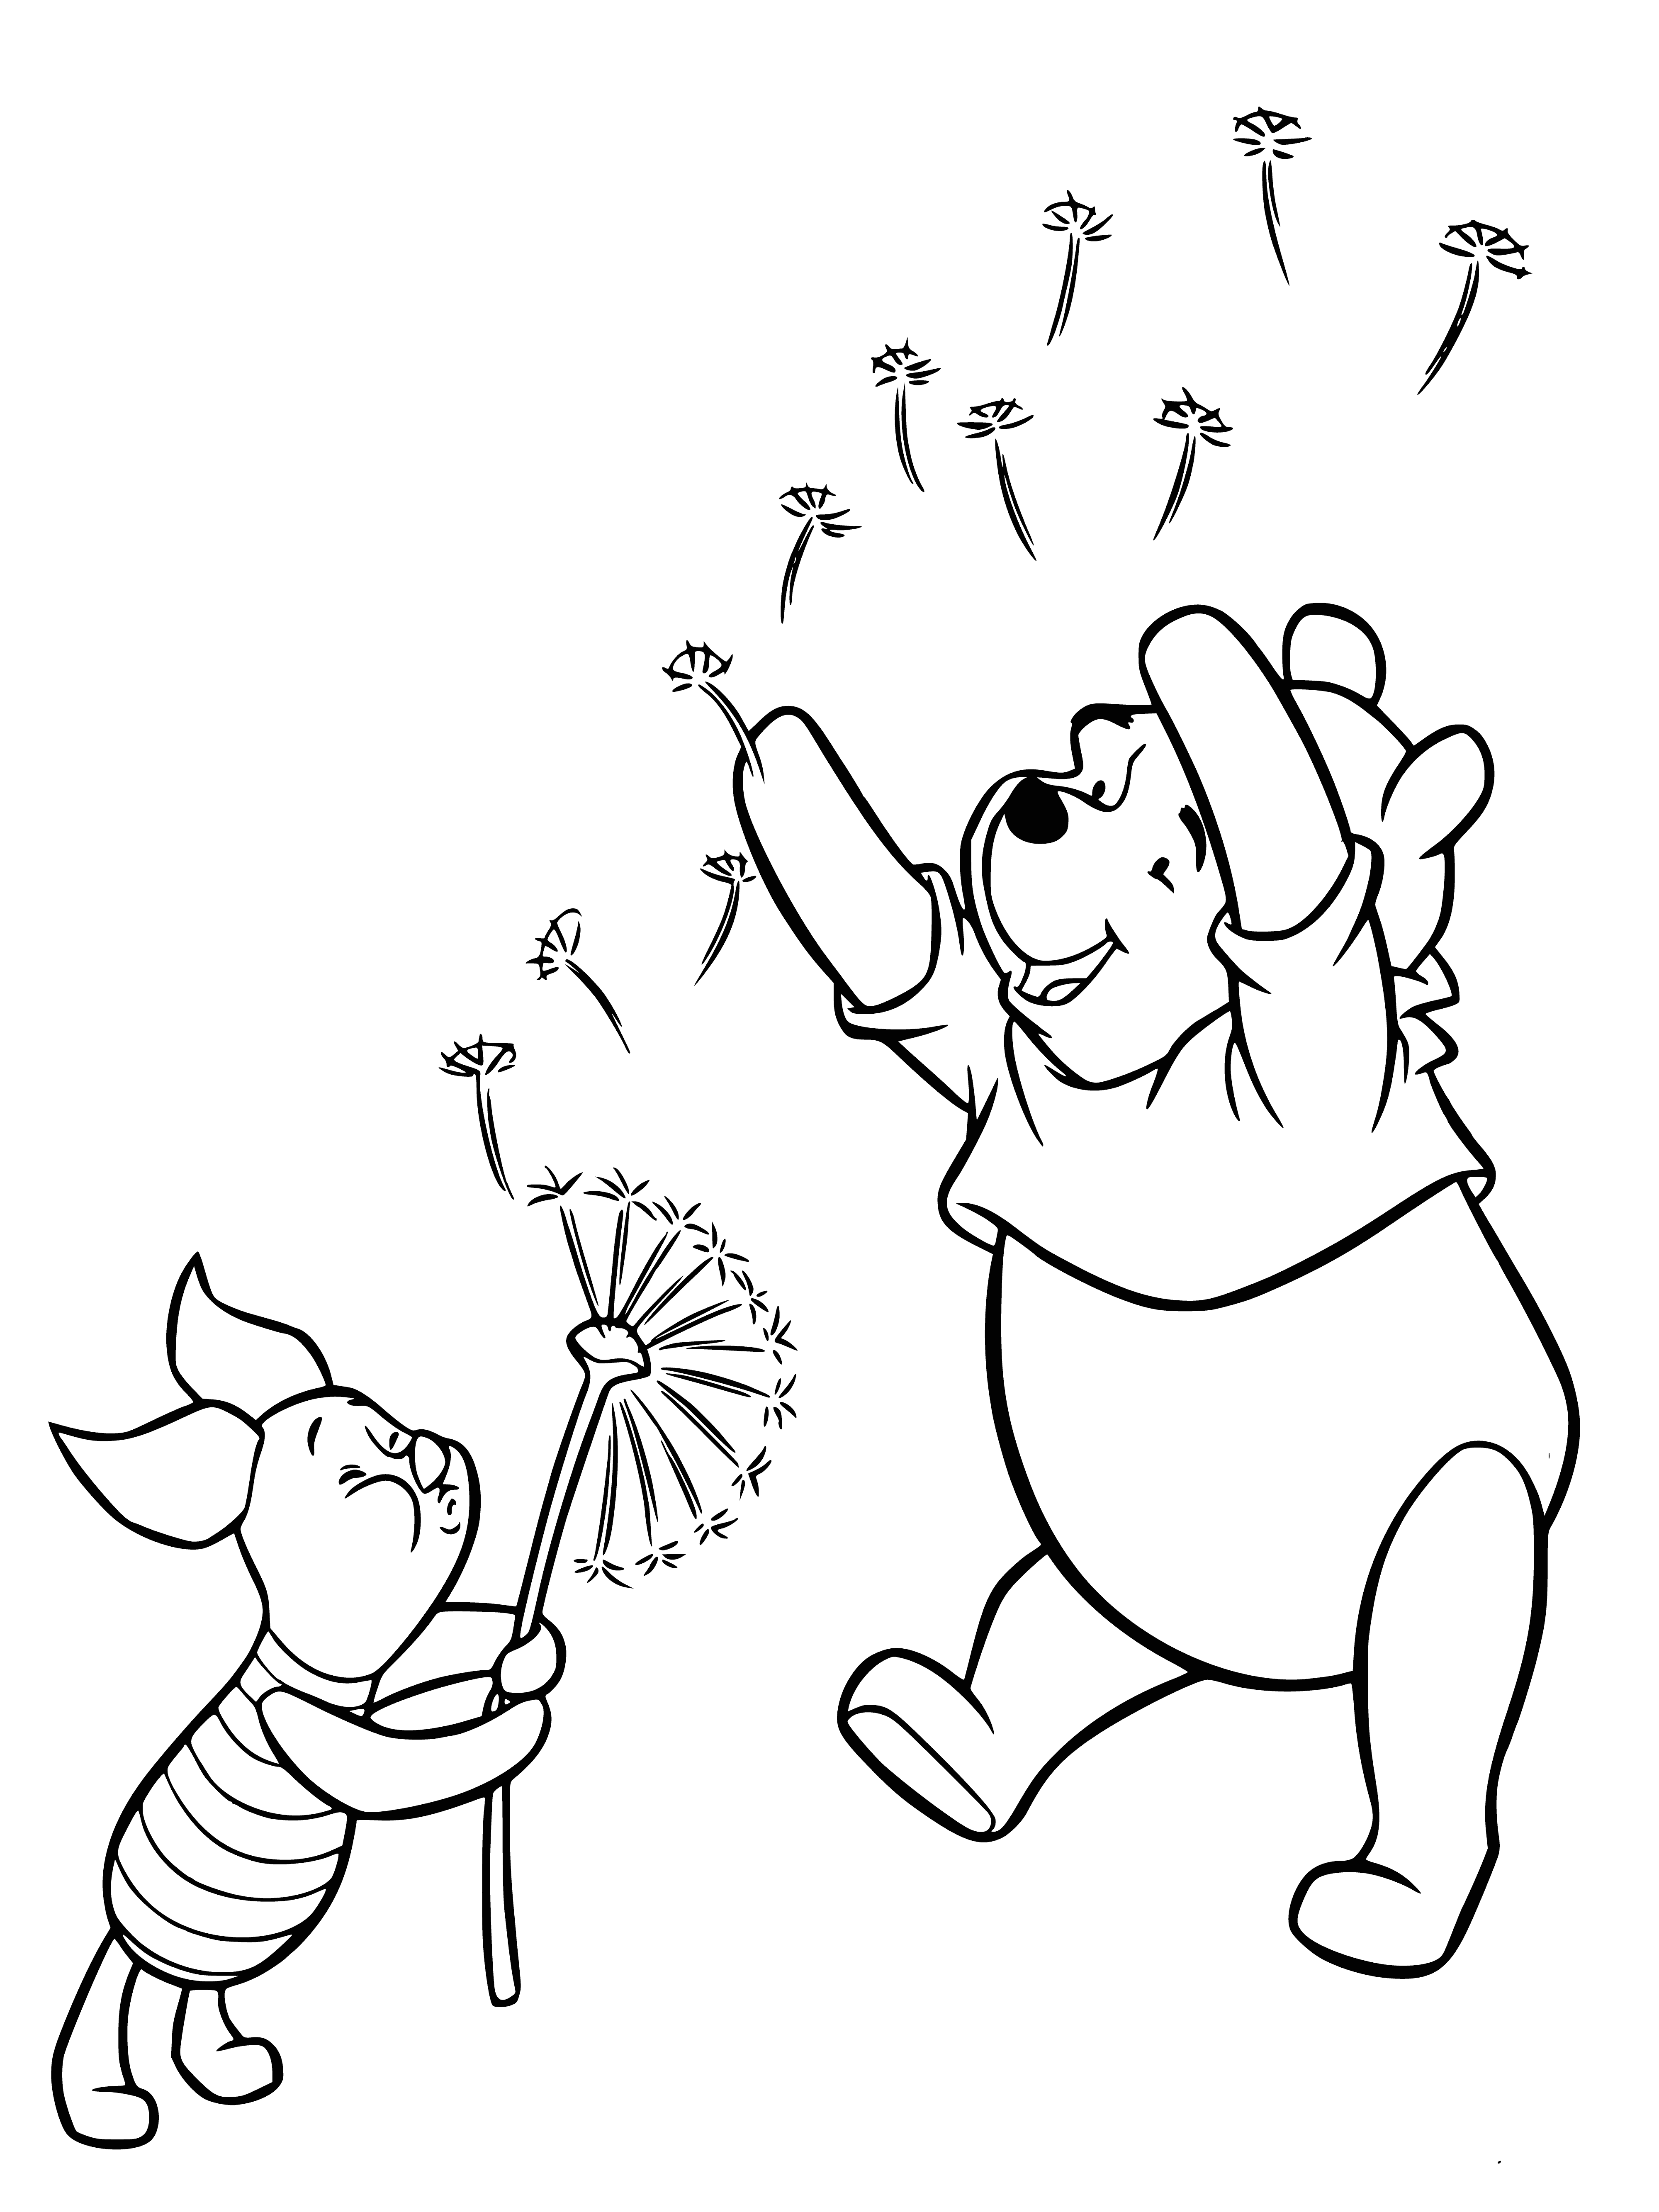 coloring page: Winnie & Piggy try to get honey in a tree; Winnie can't reach it & Piggy holds a stick, ready to whack him.